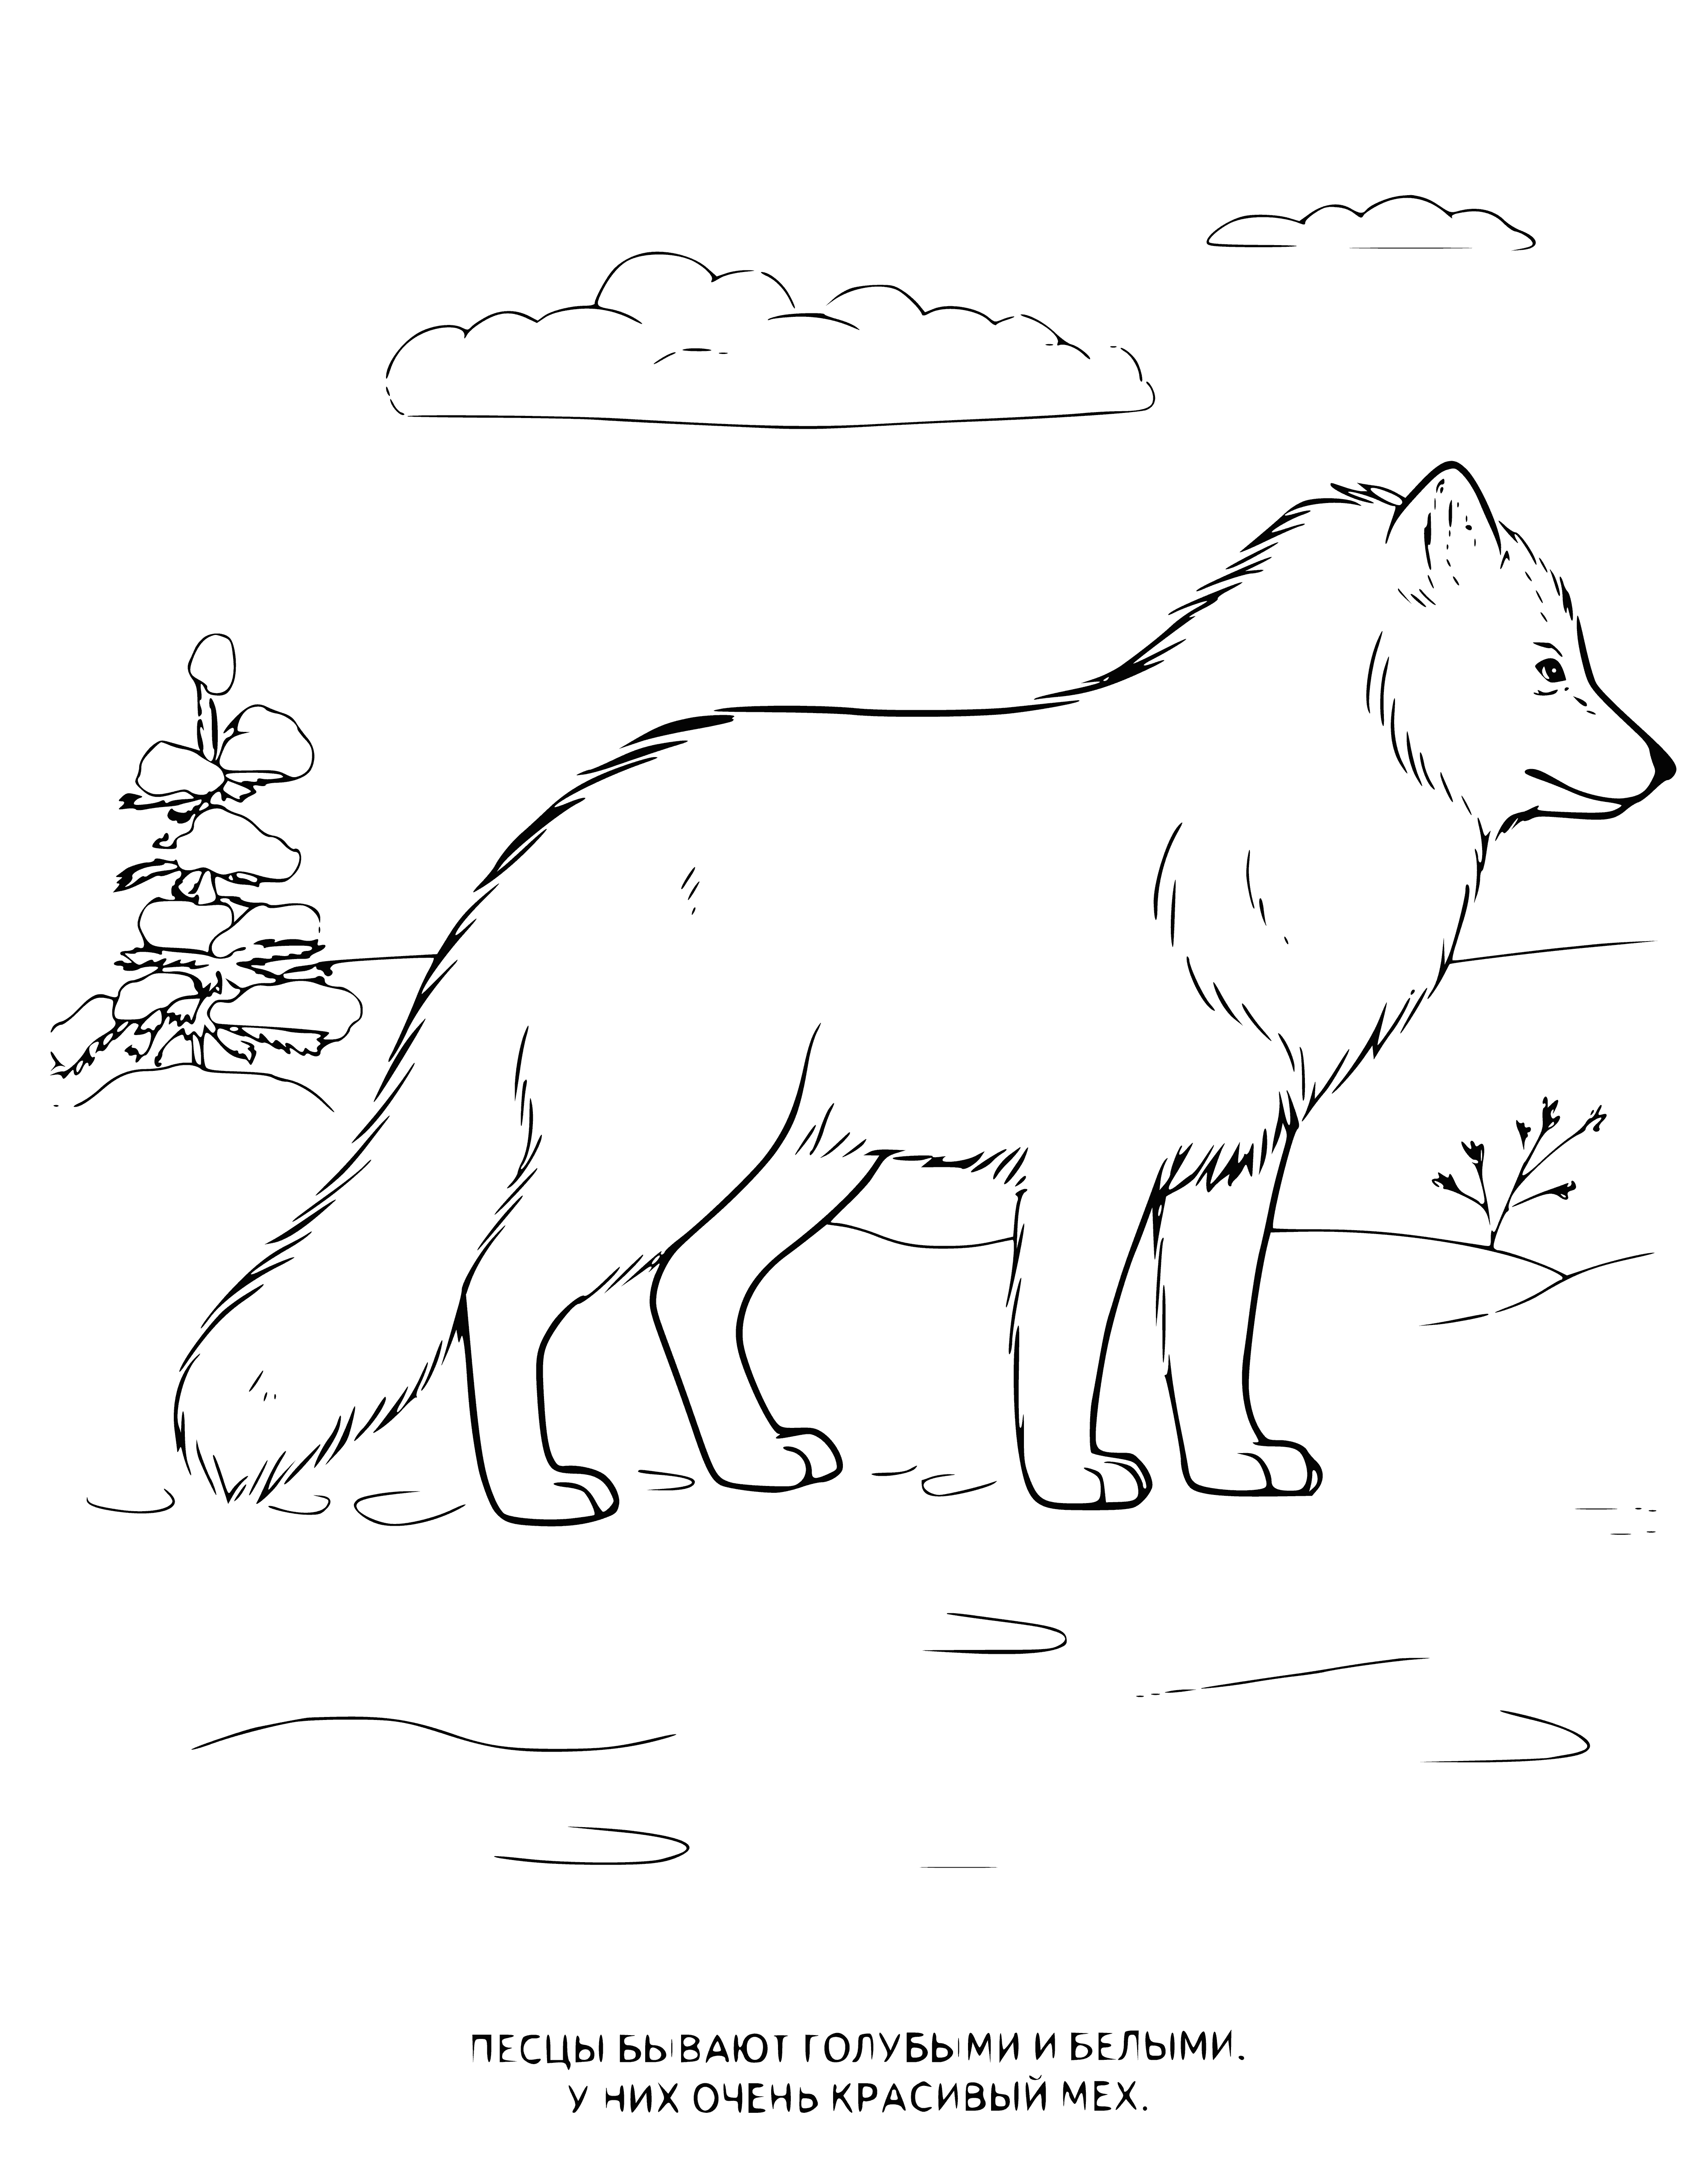 coloring page: Foxes are wild animals, resembling small dogs with pointed noses, furry ears, and bushy tails. Fur colors vary from reddish-brown to gray, black, and white.